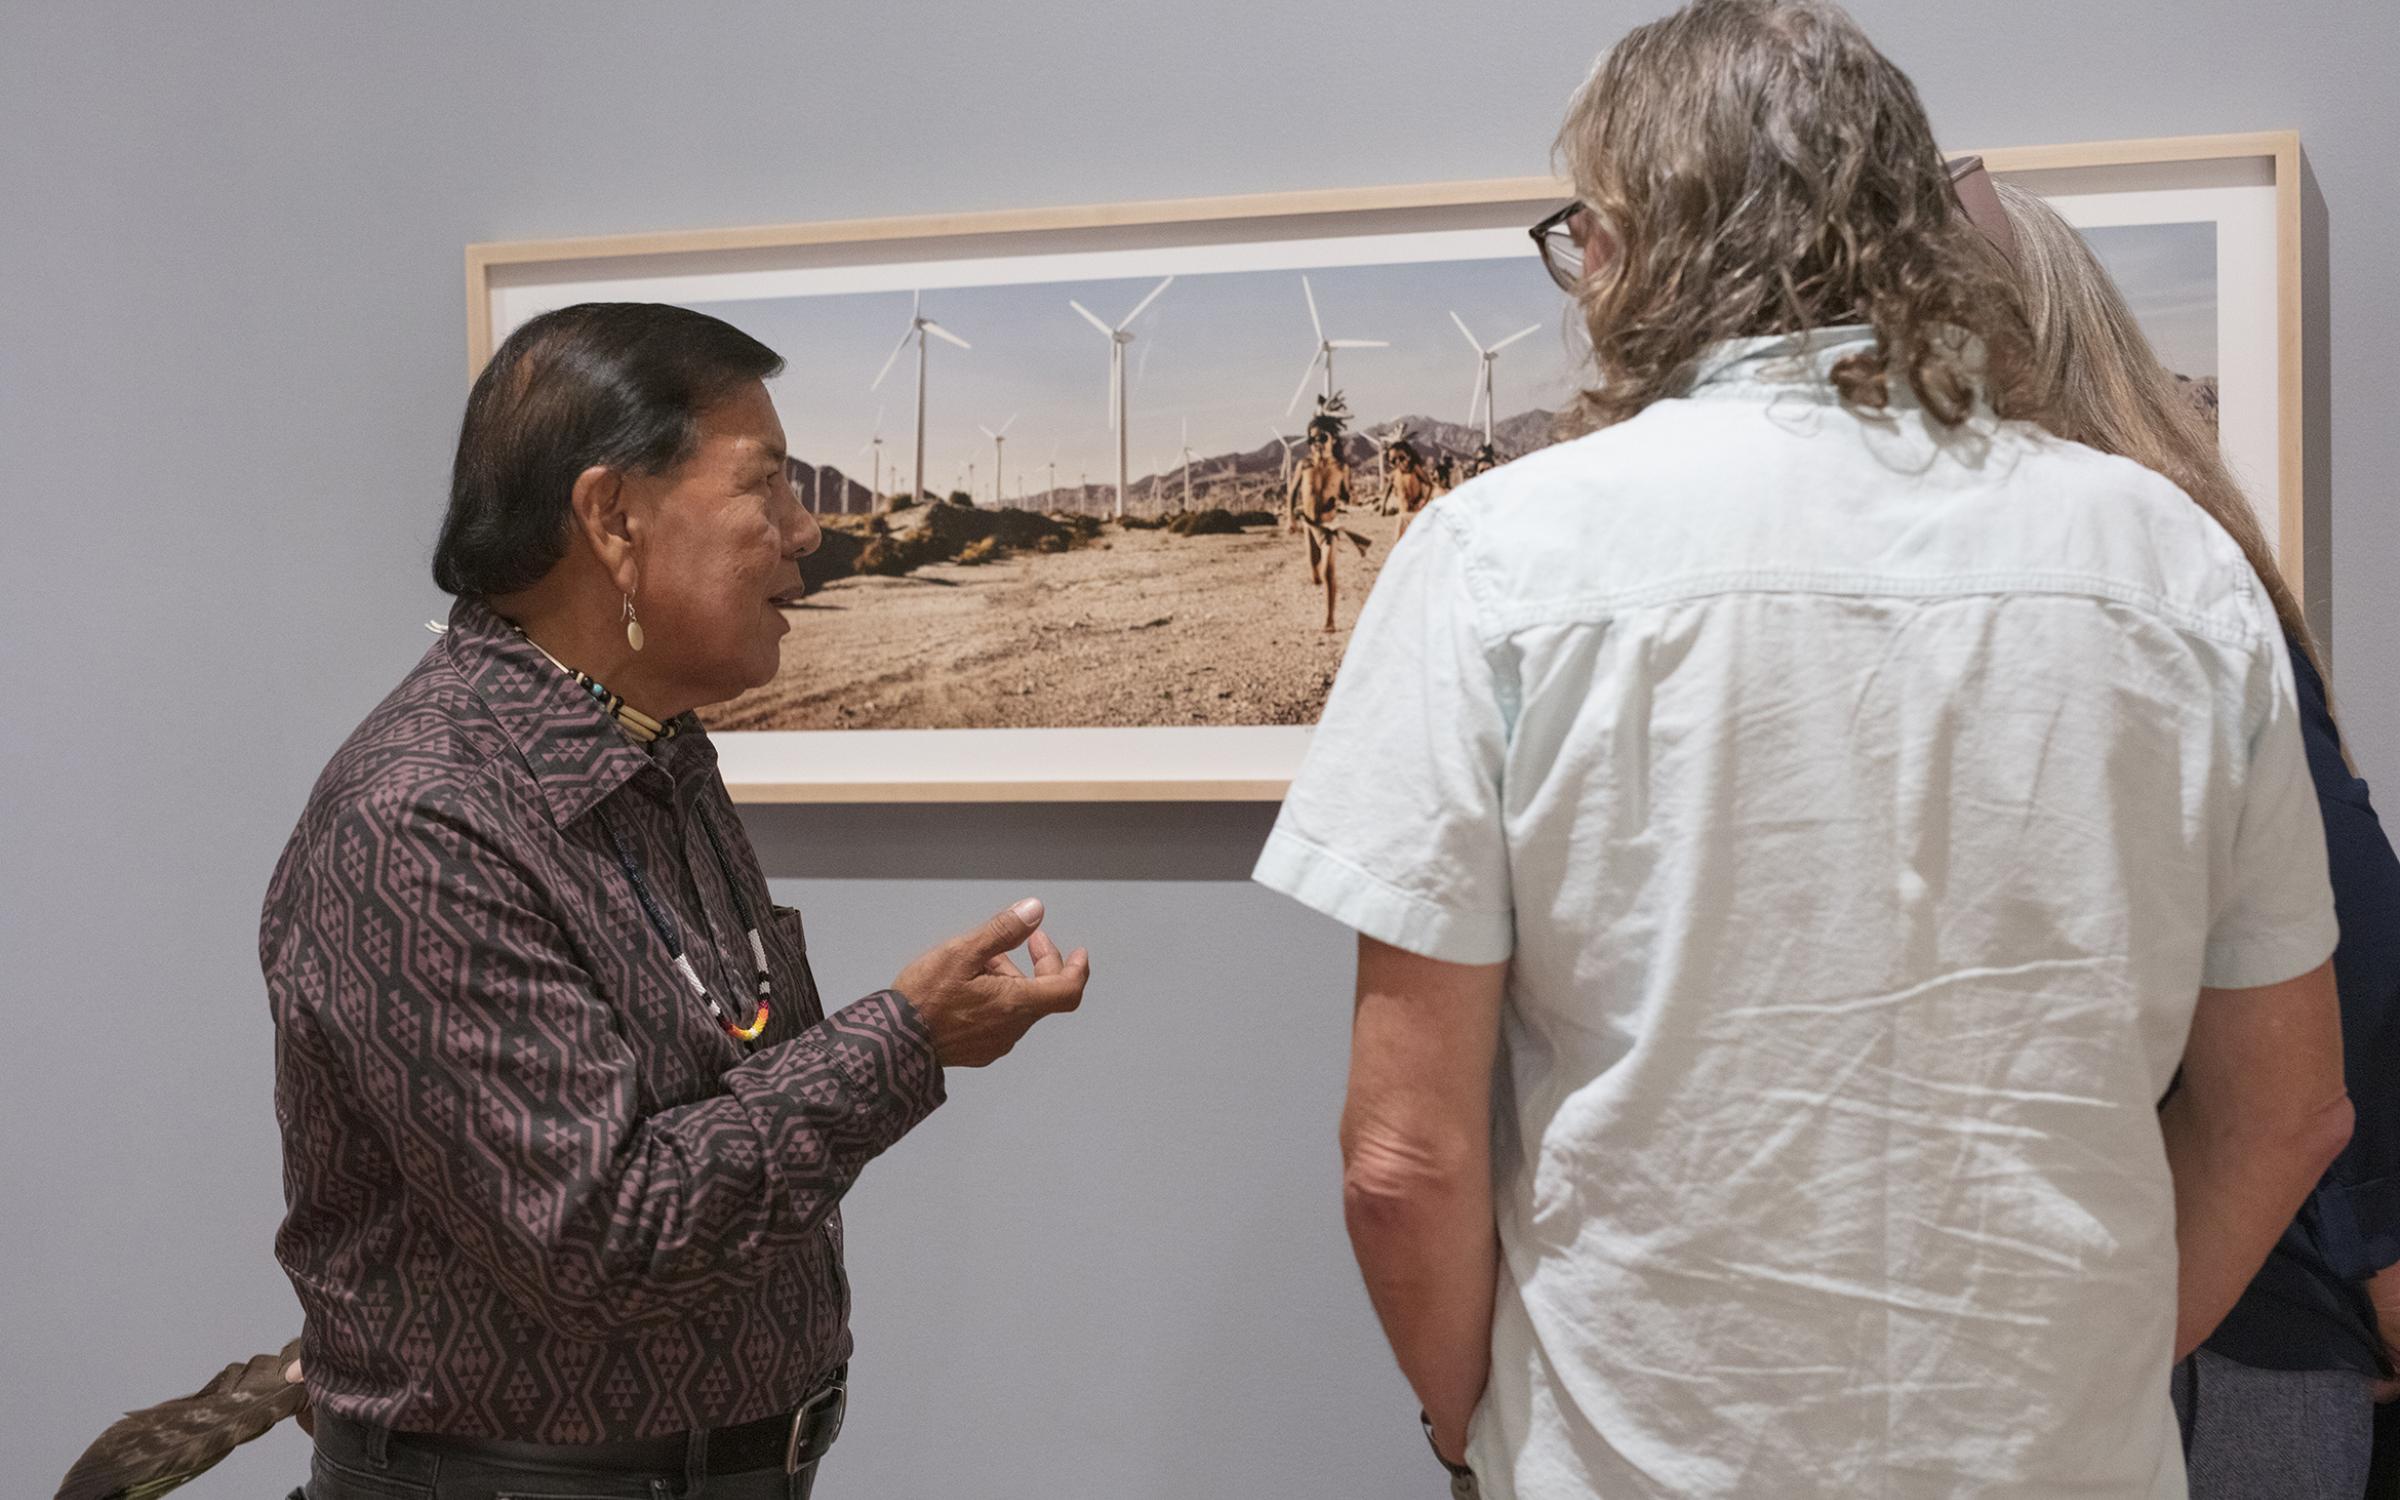 A native man in a button up shirt with dark hair speaks to two white people with grey hair. They are all looking at a framed artwork on a light grey wall.